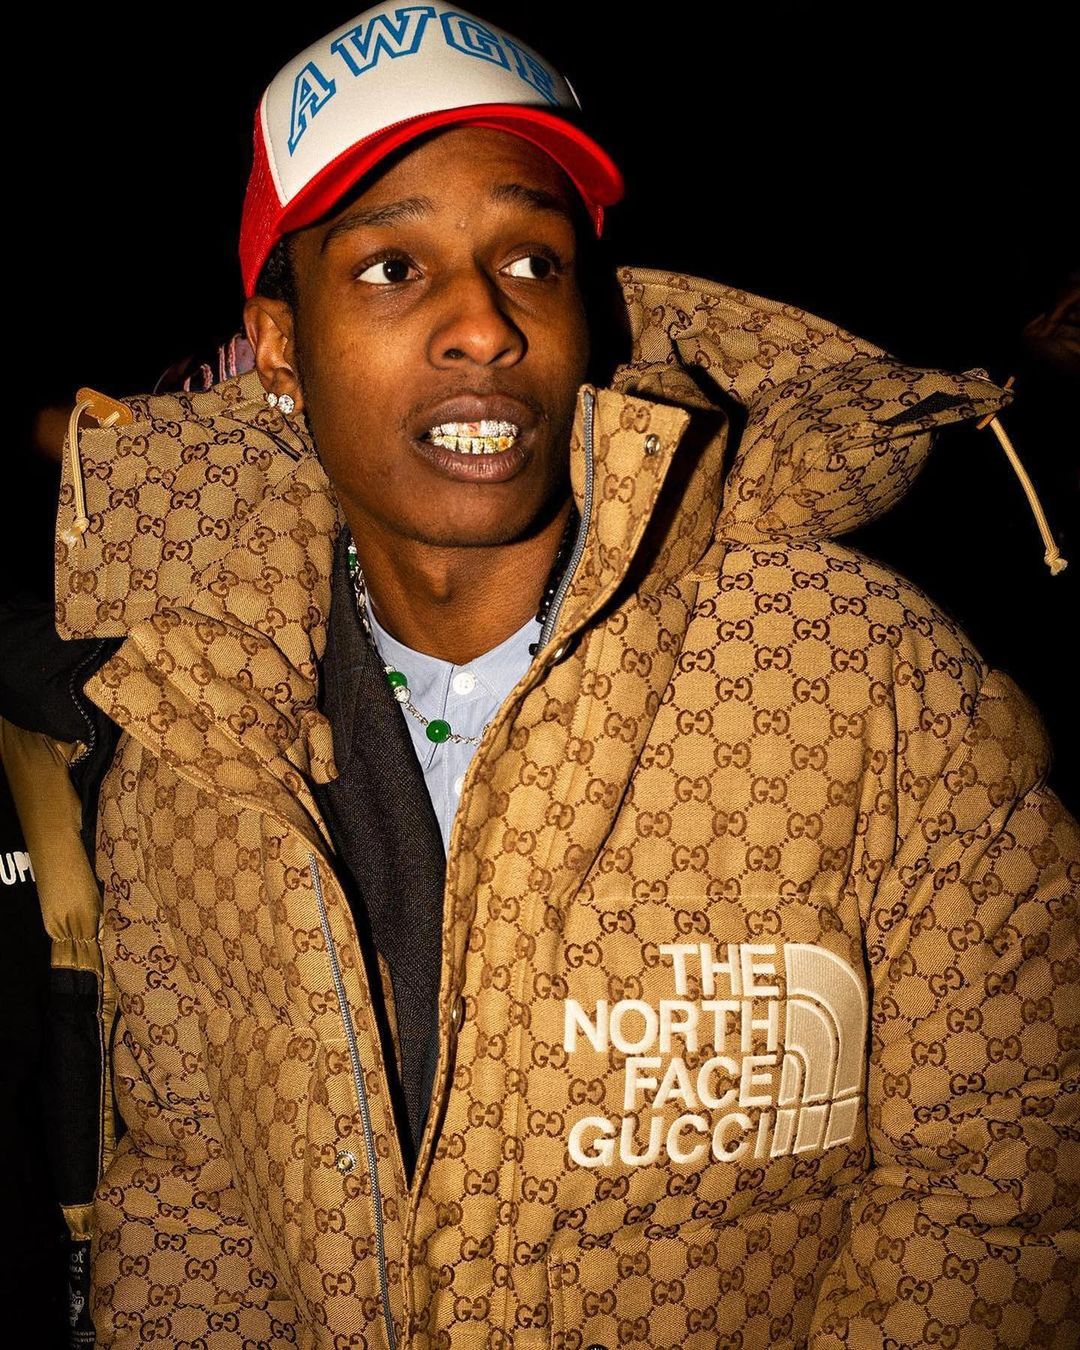 Nogen som helst Hyret . SPOTTED: ASAP Rocky Steps out in The North Face x Gucci – PAUSE Online |  Men's Fashion, Street Style, Fashion News & Streetwear